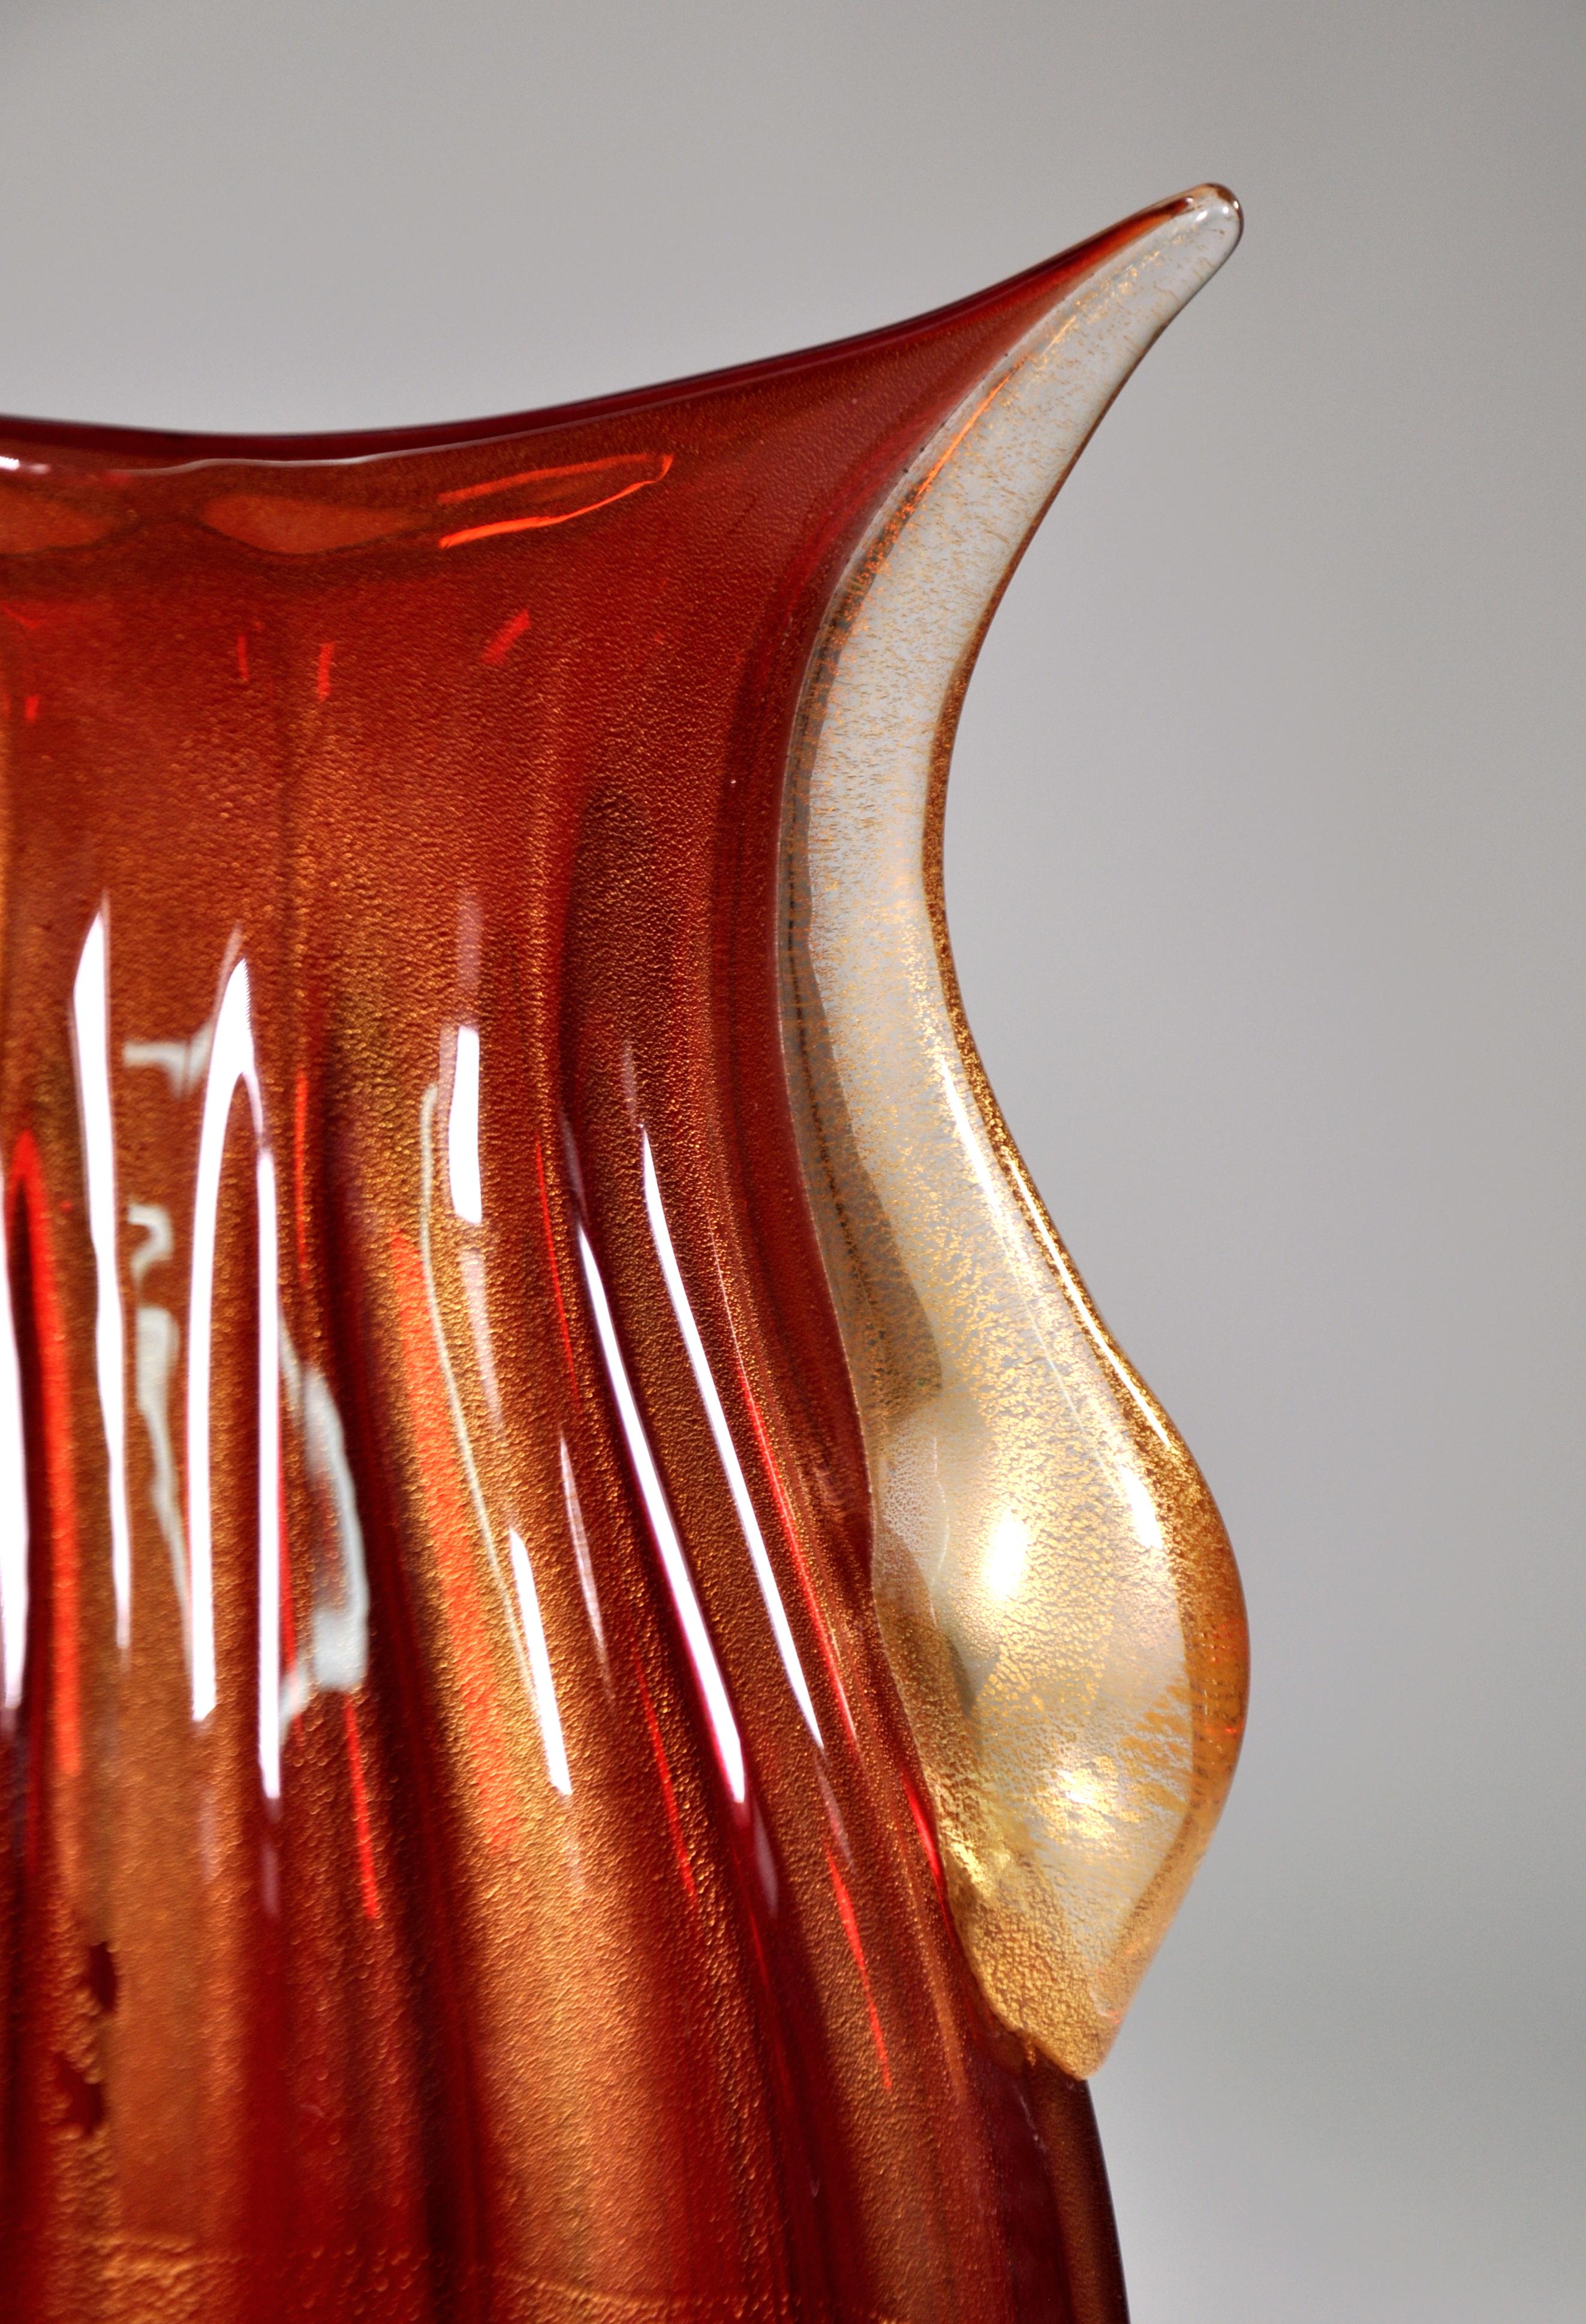 Signed Pair of Red and Gold Murano Glass Vases by Pino Signoretto For Sale 9